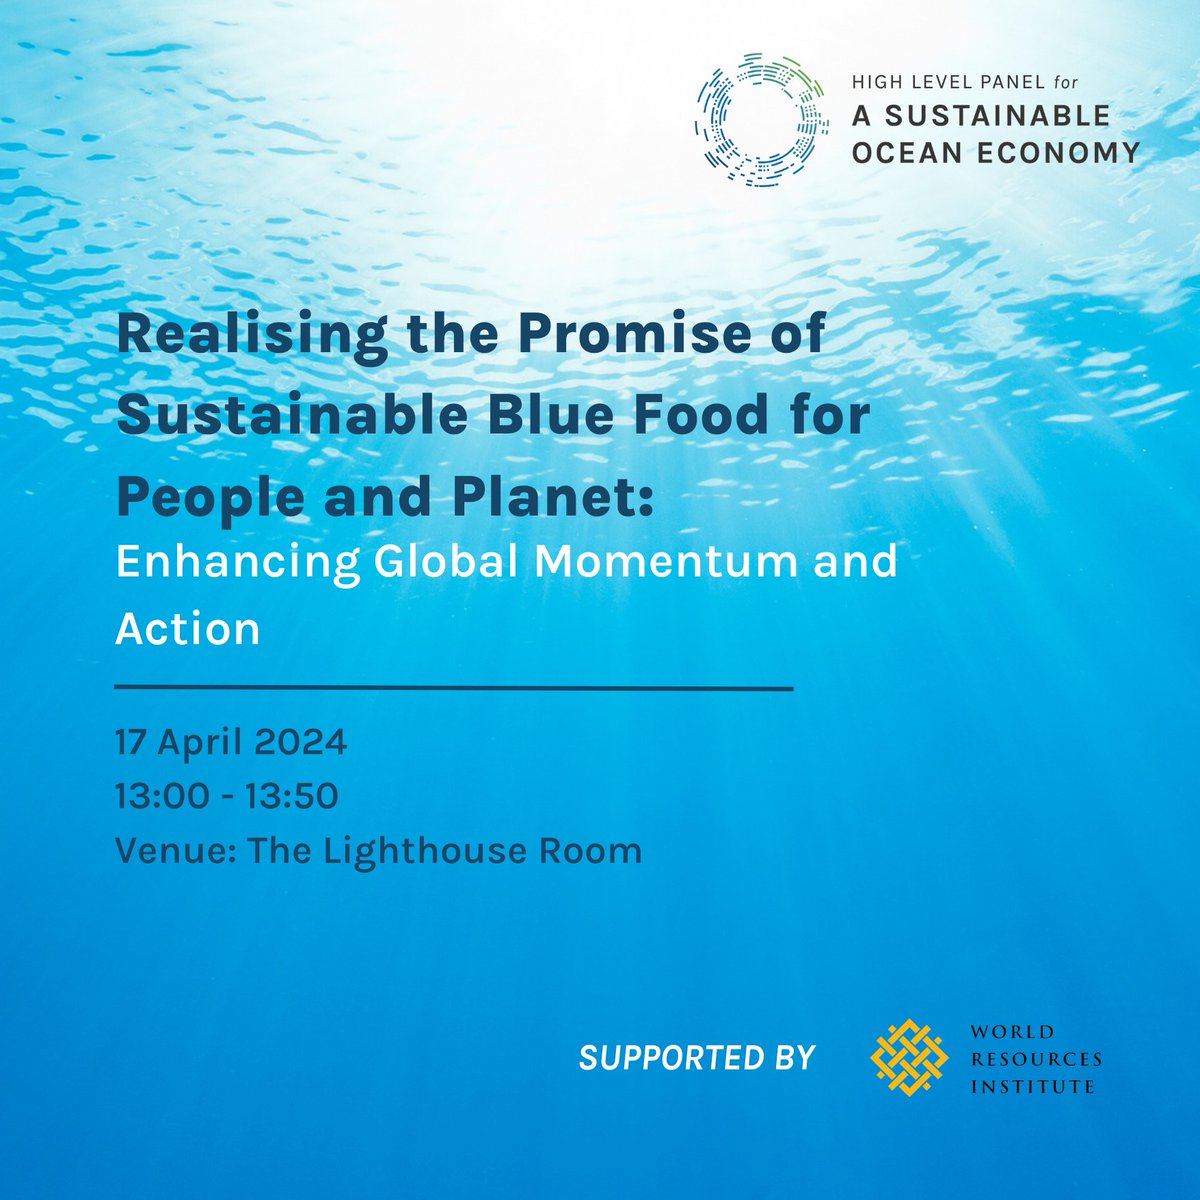 🌊TOMORROW🌊 'Realising the Promise of Sustainable Blue Food for People and Planet' event will take place at @OurOceanGreece hosted by the #OceanPanel. 📆 17 April 2024 ⏰ 13:00 - 13:50 Experts will discuss enhancing global action towards #SustainableBlueFood.